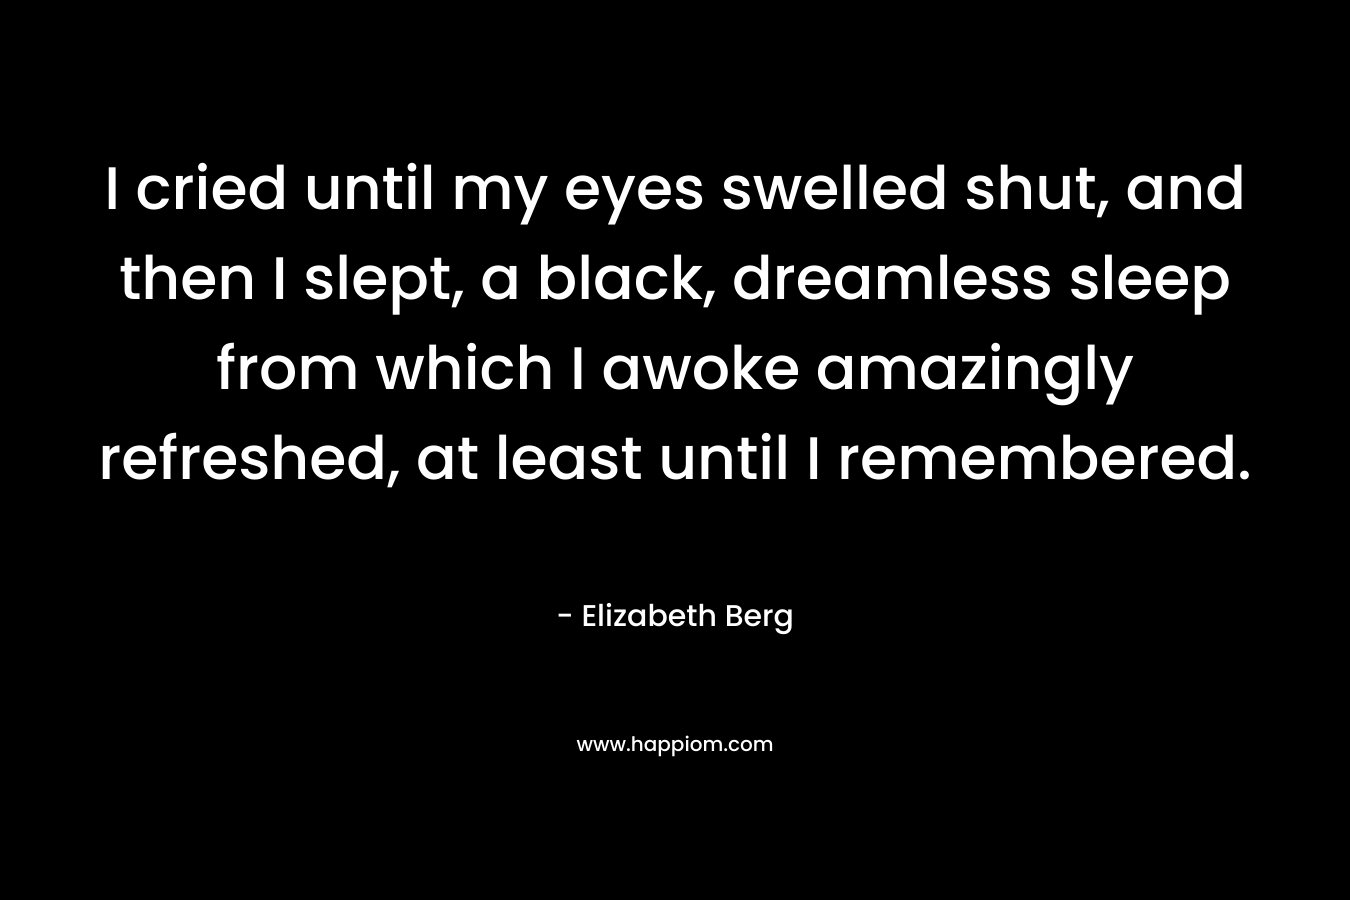 I cried until my eyes swelled shut, and then I slept, a black, dreamless sleep from which I awoke amazingly refreshed, at least until I remembered.